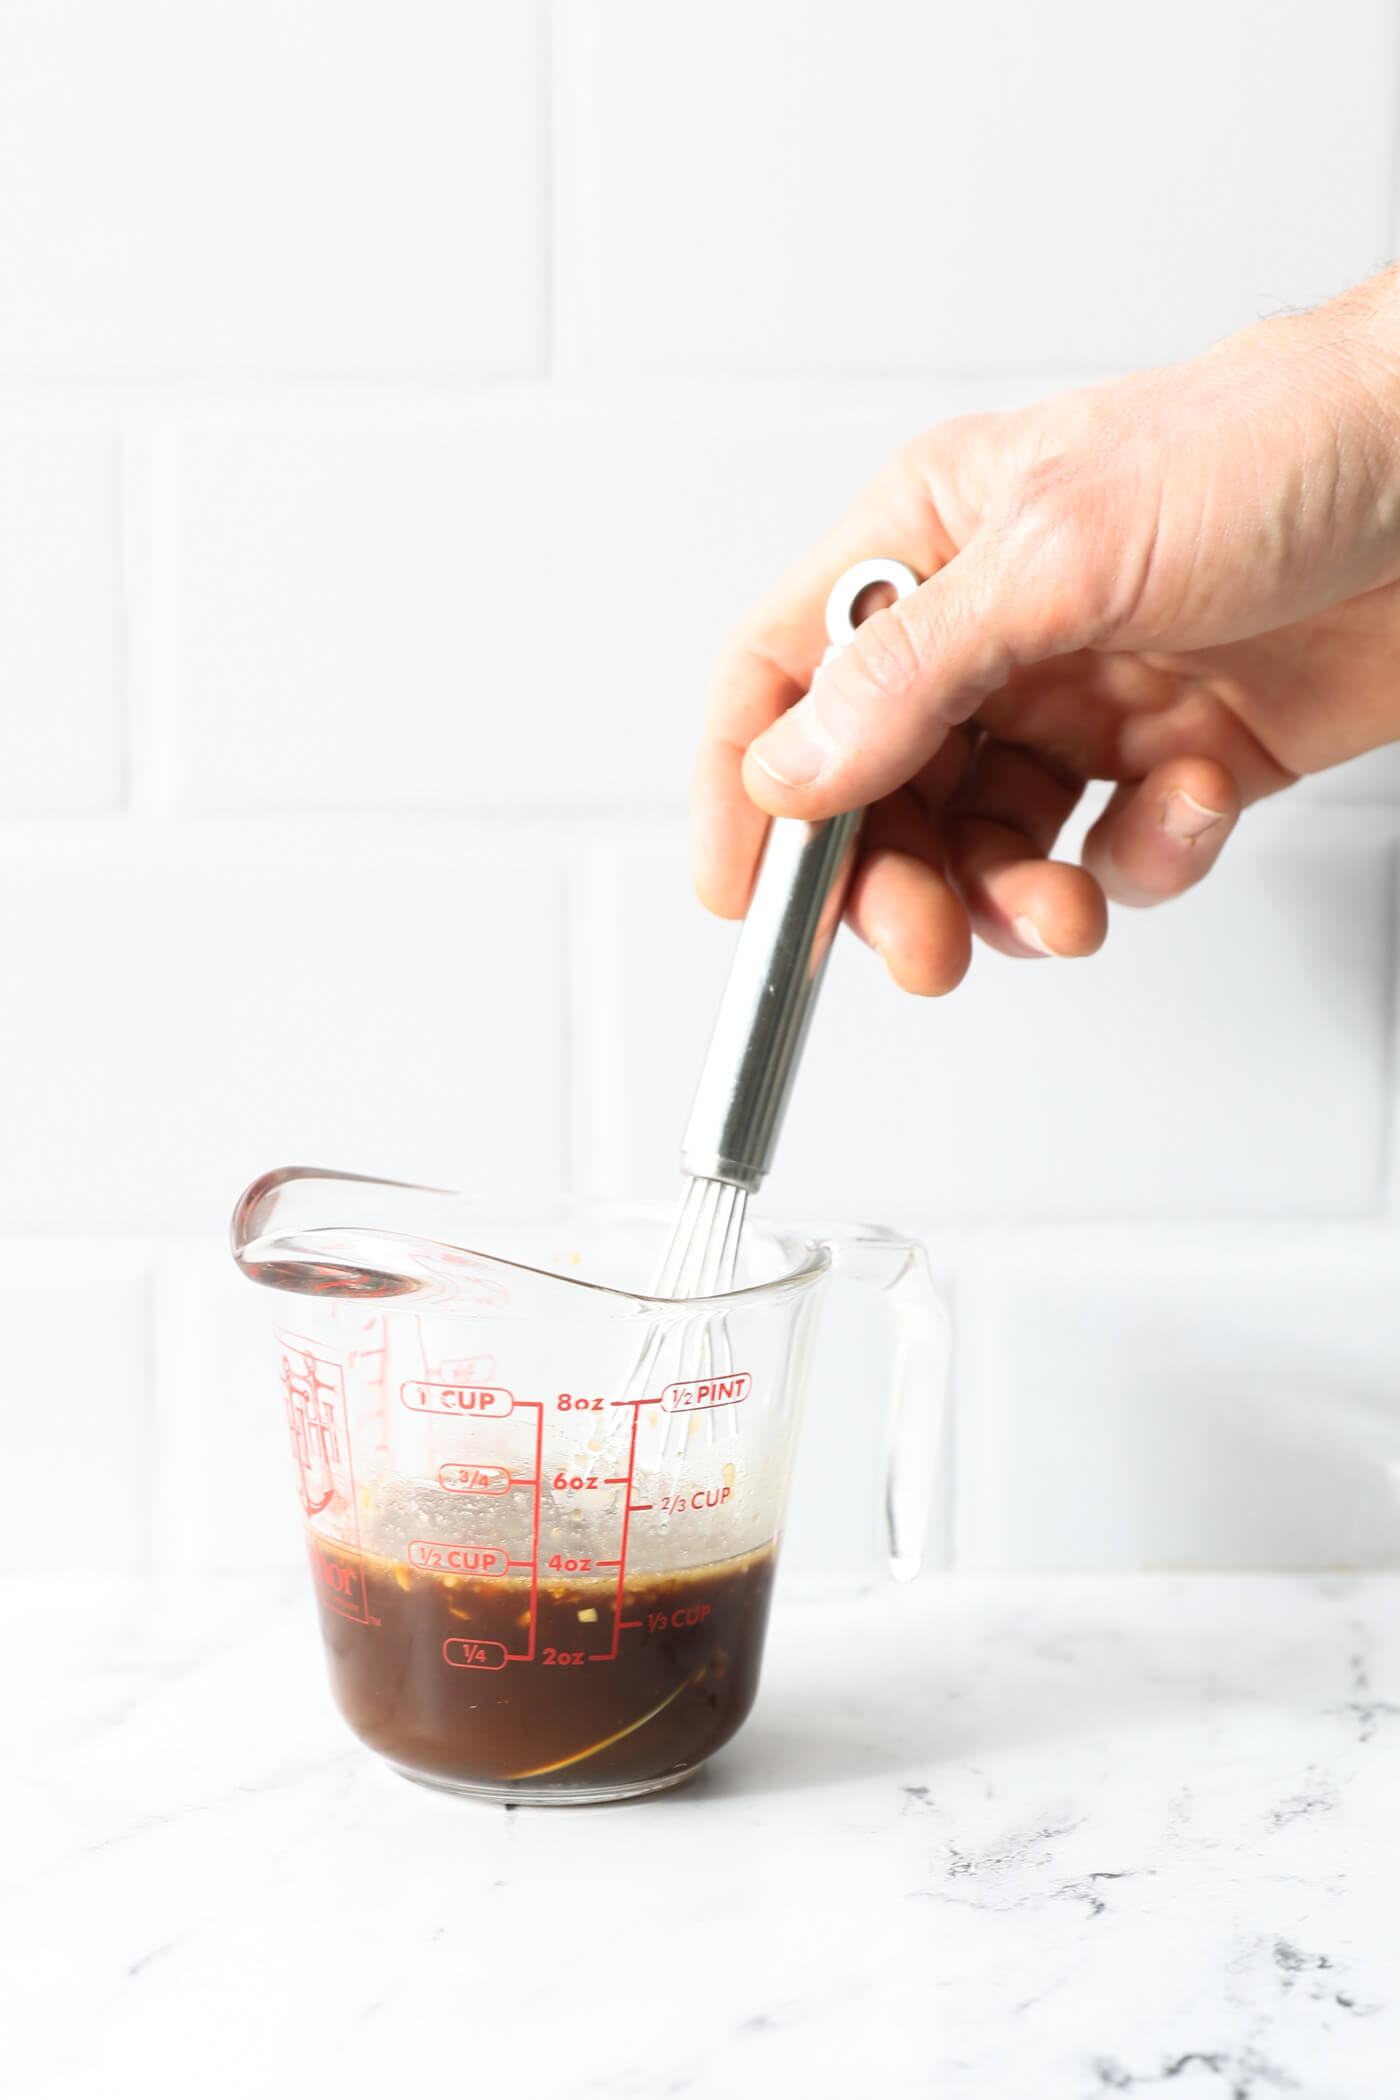 Stirring sauce in a glass measuring jar with a whisk.